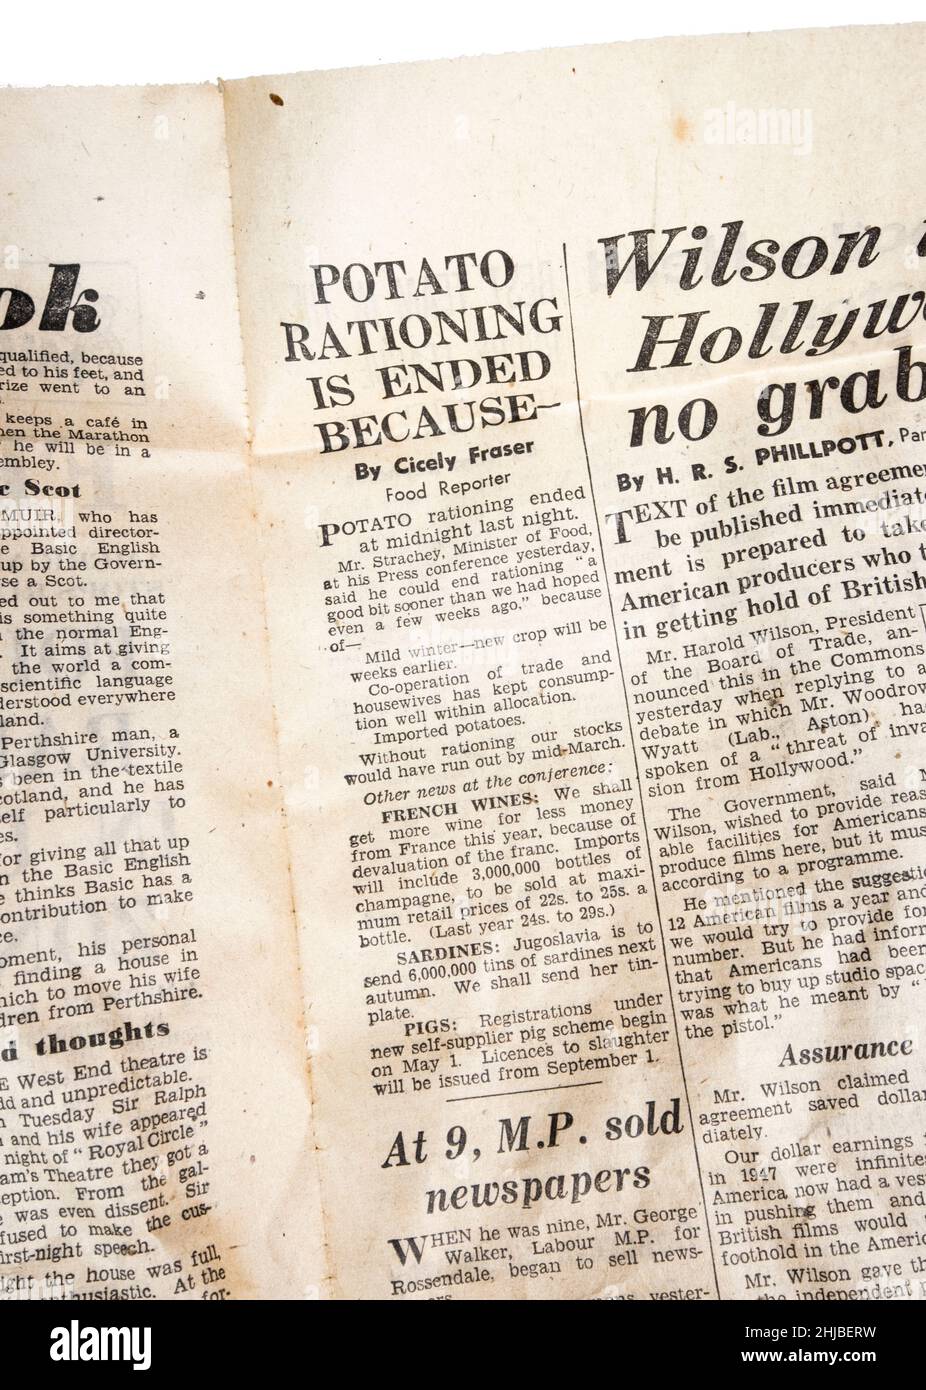 Newspaper article from 1 May 1948 edition of the Daily Herald about the end of potato rashioning and importing French wine for lower cost, UK Stock Photo